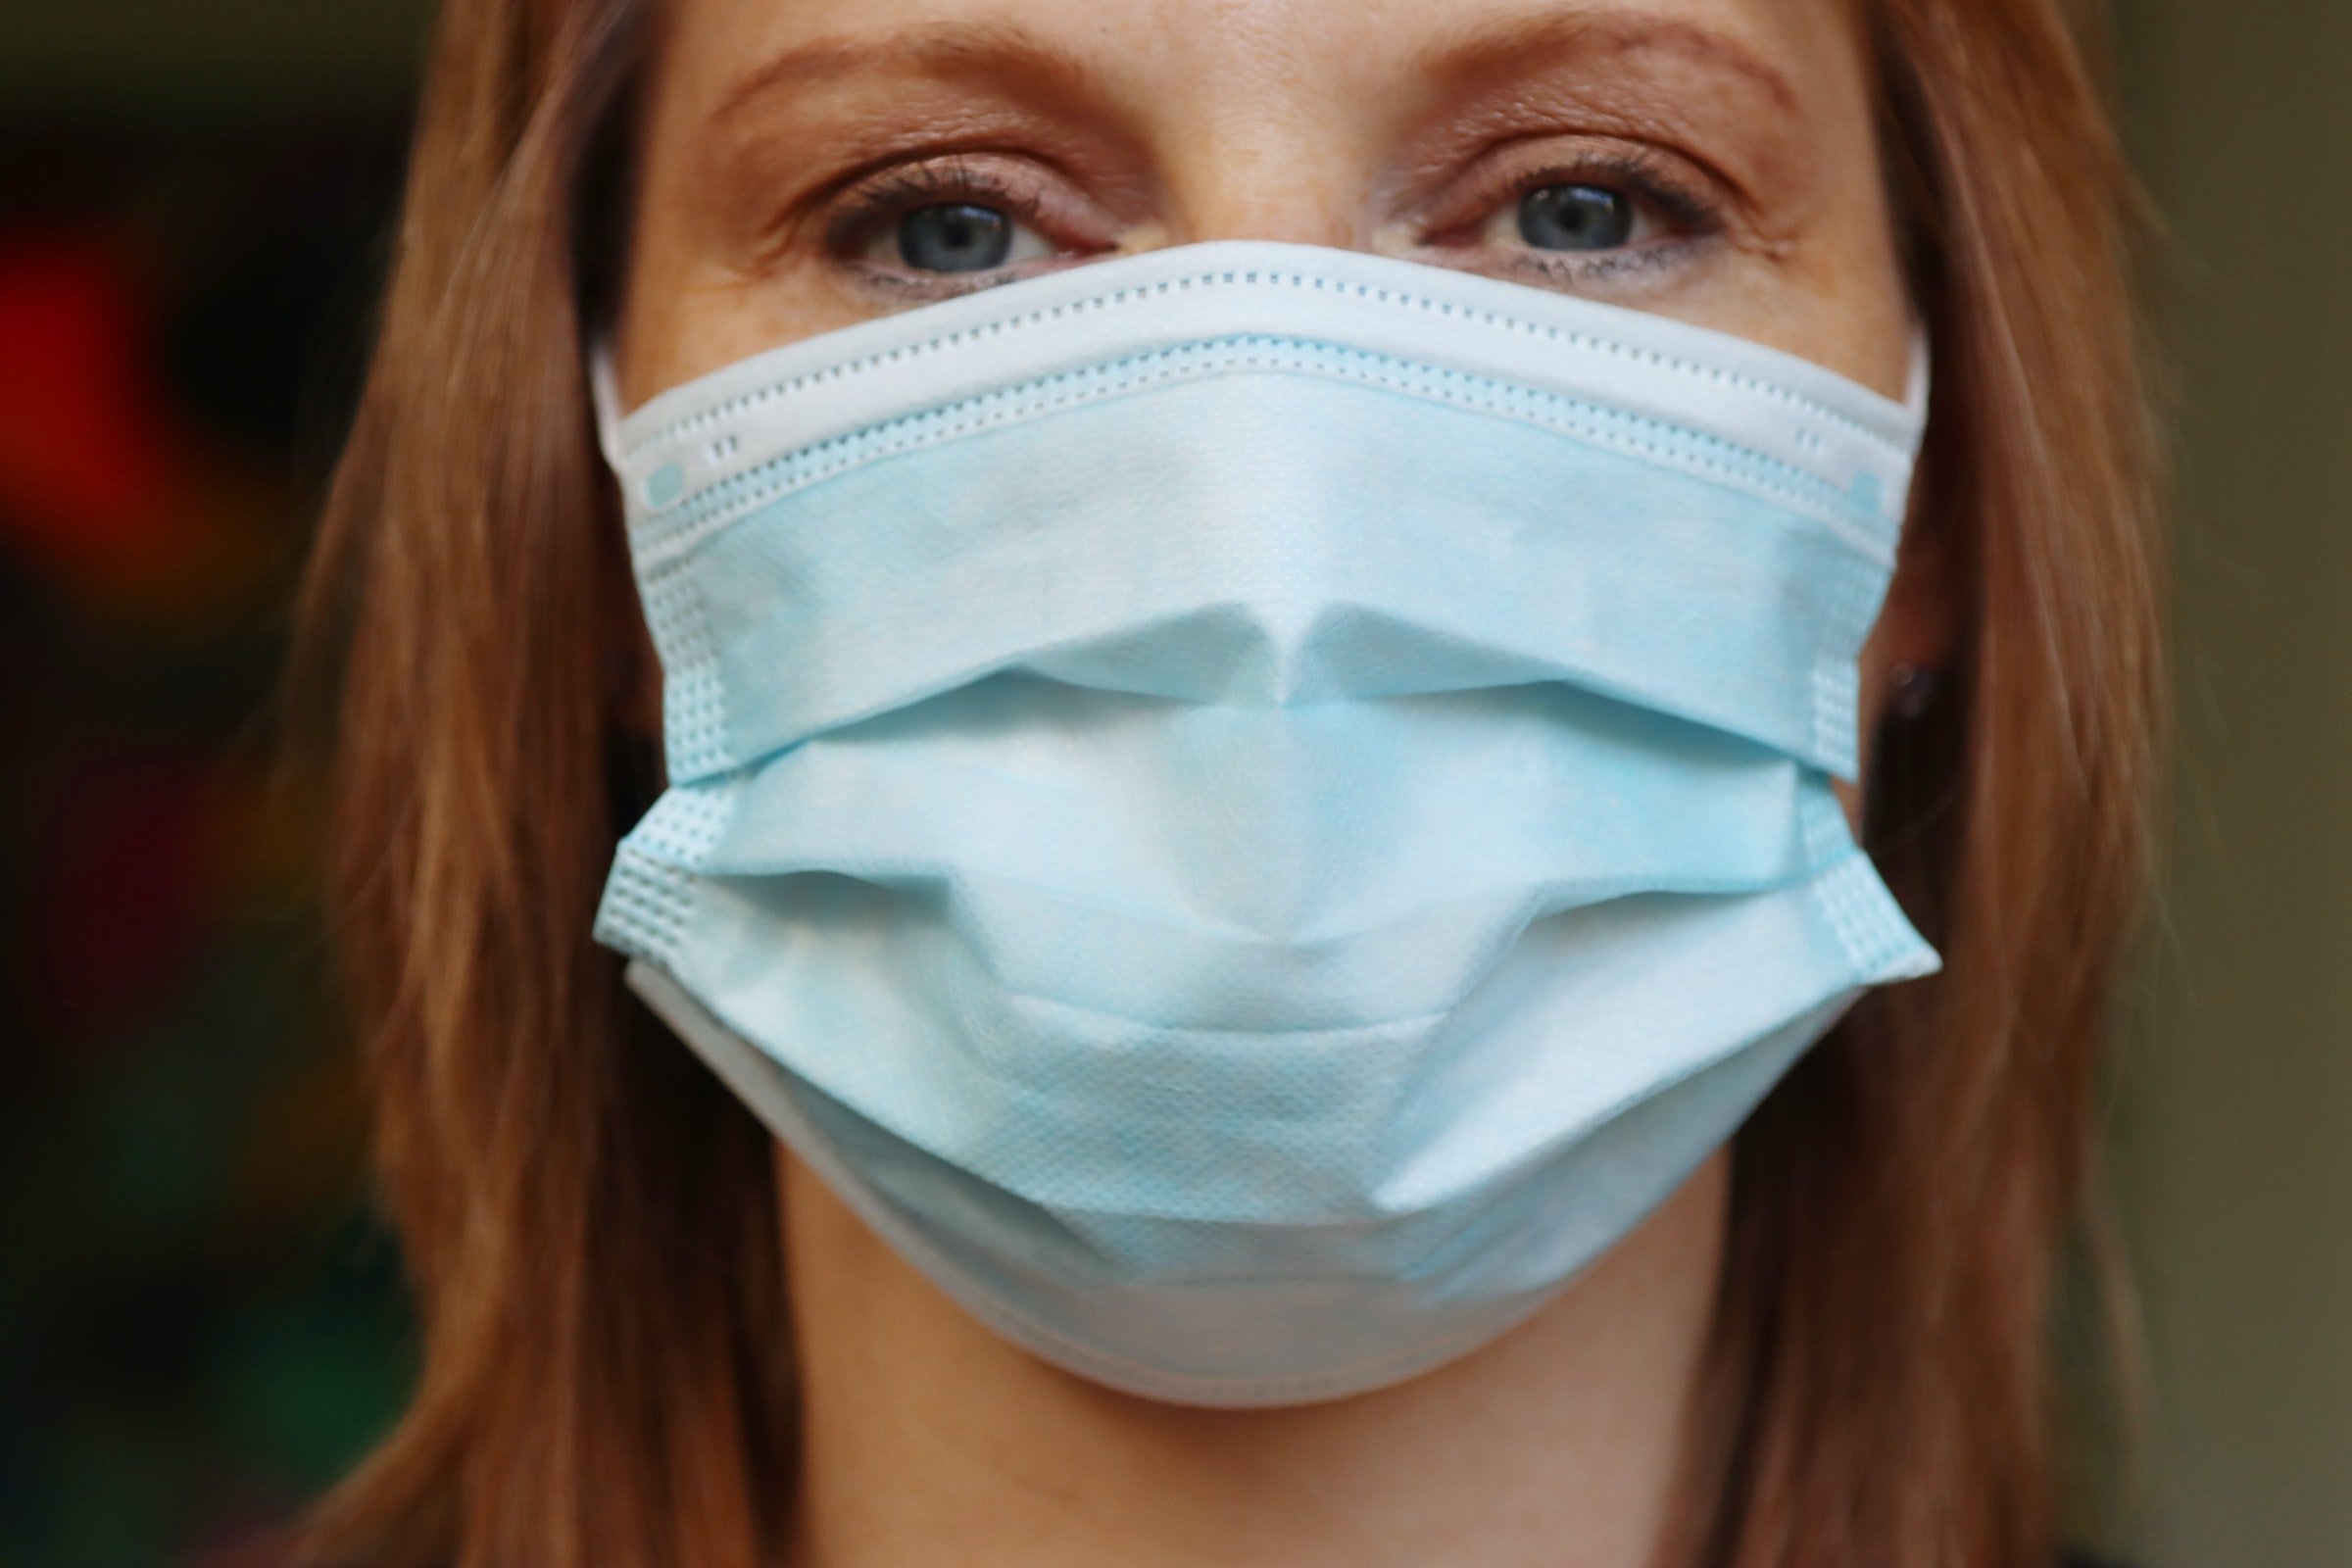 A woman in face mask. | Source: Unsplash